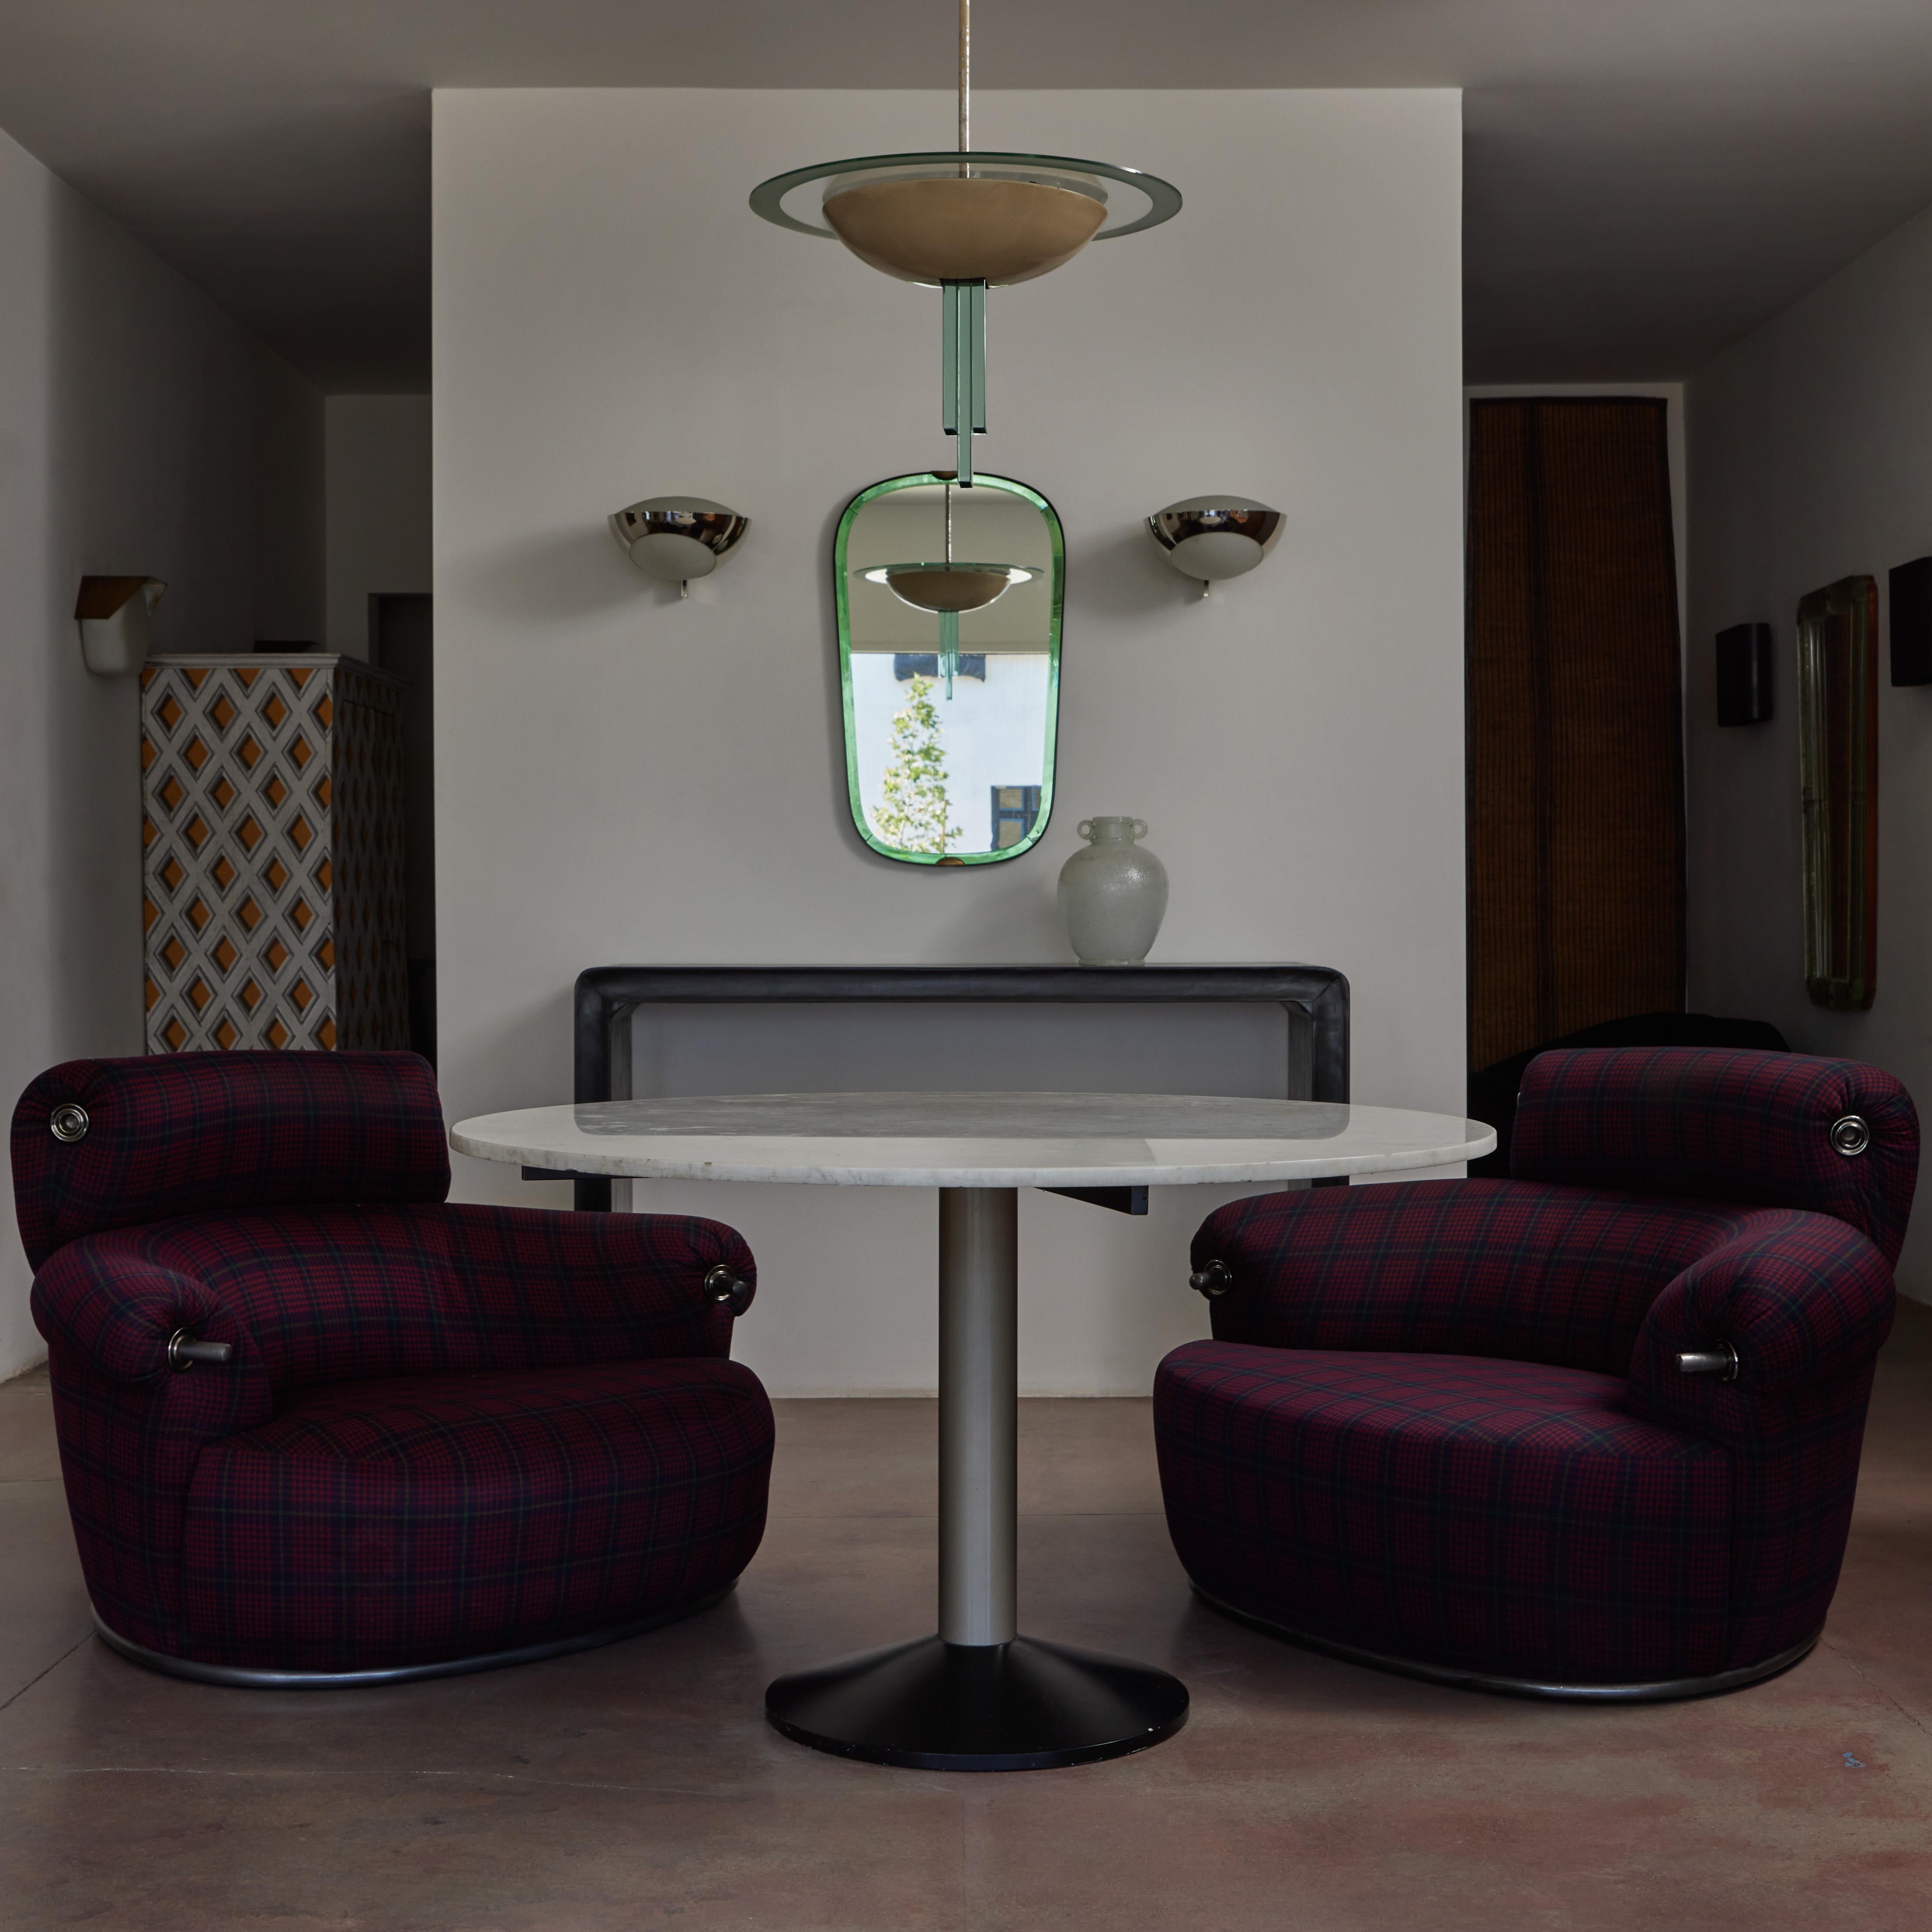 Pair of P20B Toro armchairs by Luigi Caccia Dominioni for Azucena. Made in Italy circa 1973.

Original design for the rooms of the Club House in Monticello. Upholstered in tartan fabric.

Reference: M. Imparato, F. Radaelli, S. Milesi (a cura di),